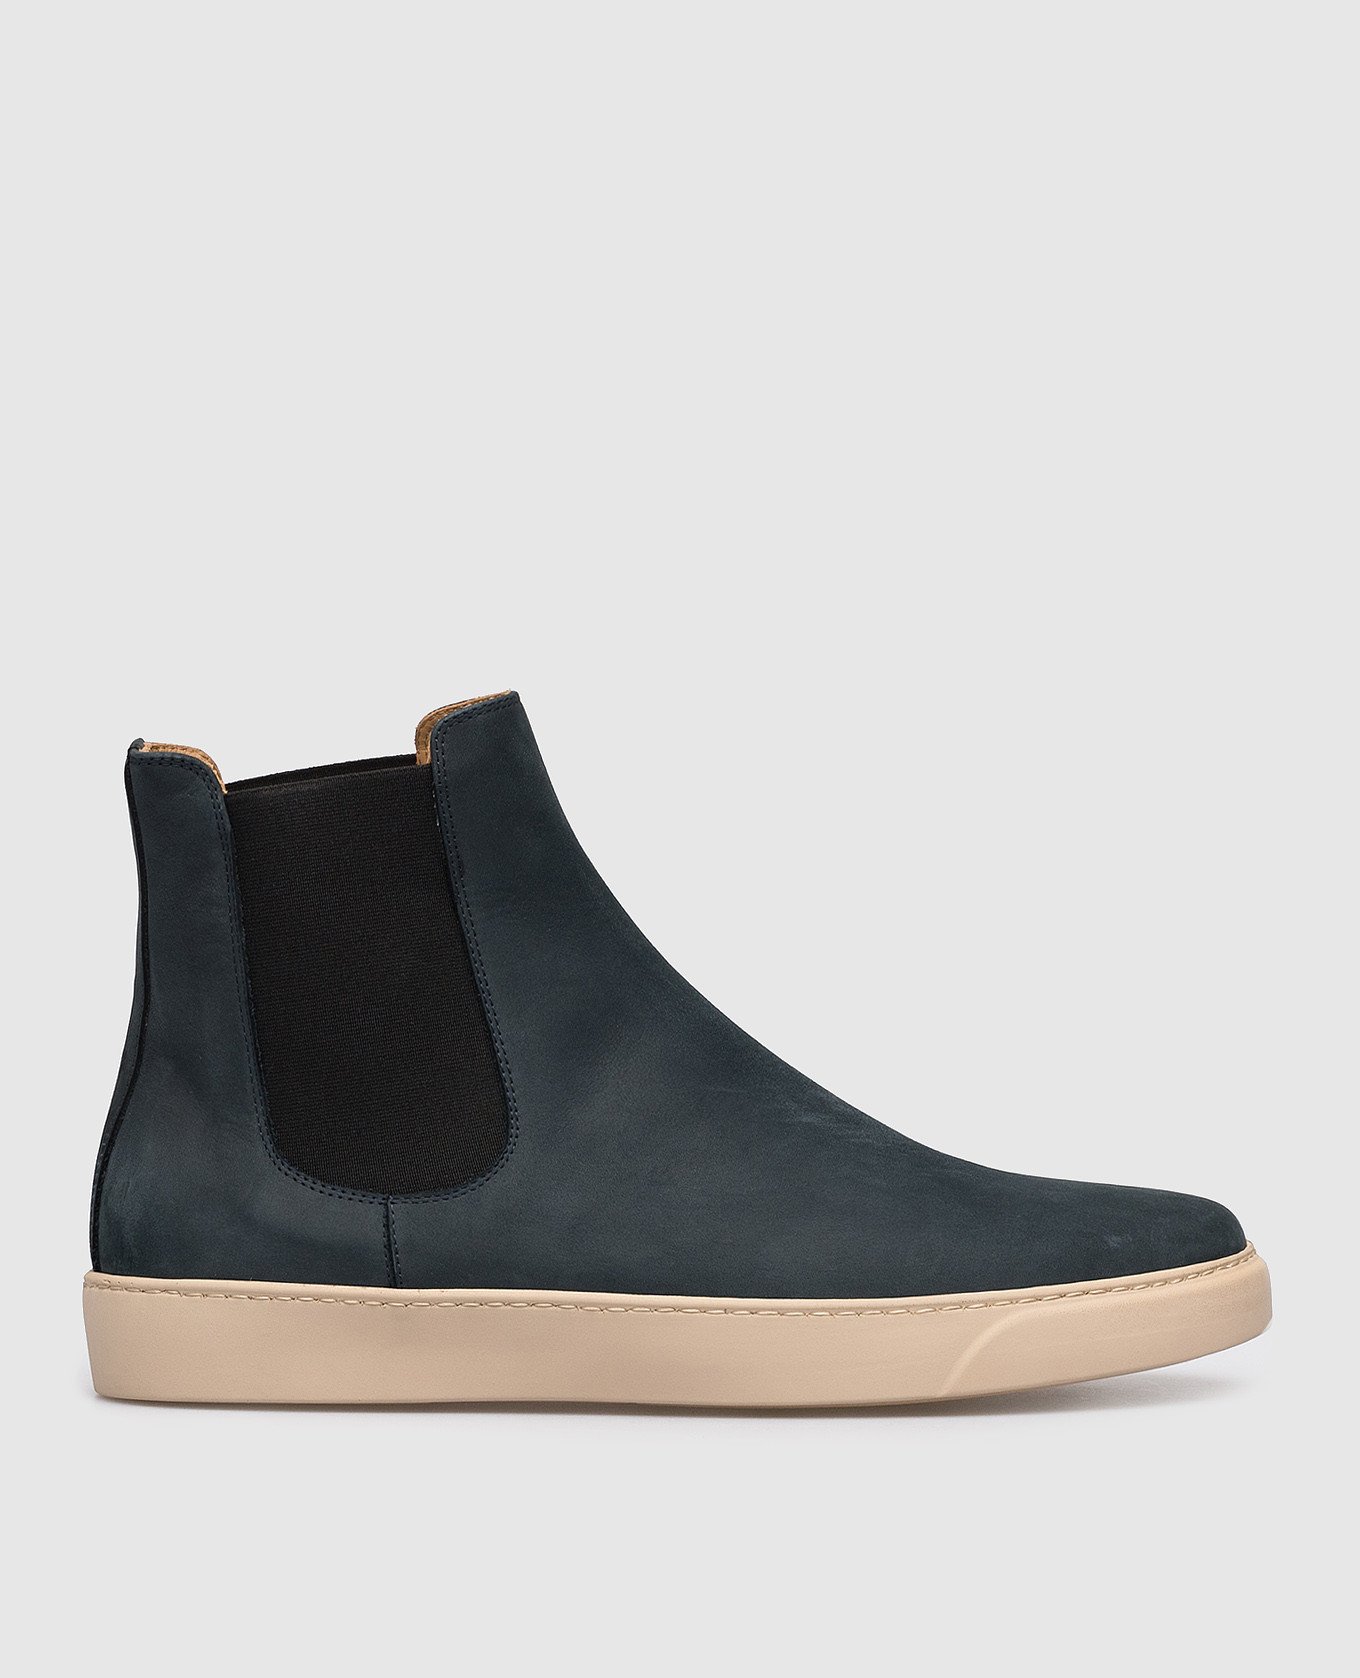 Blue leather Chelsea boots